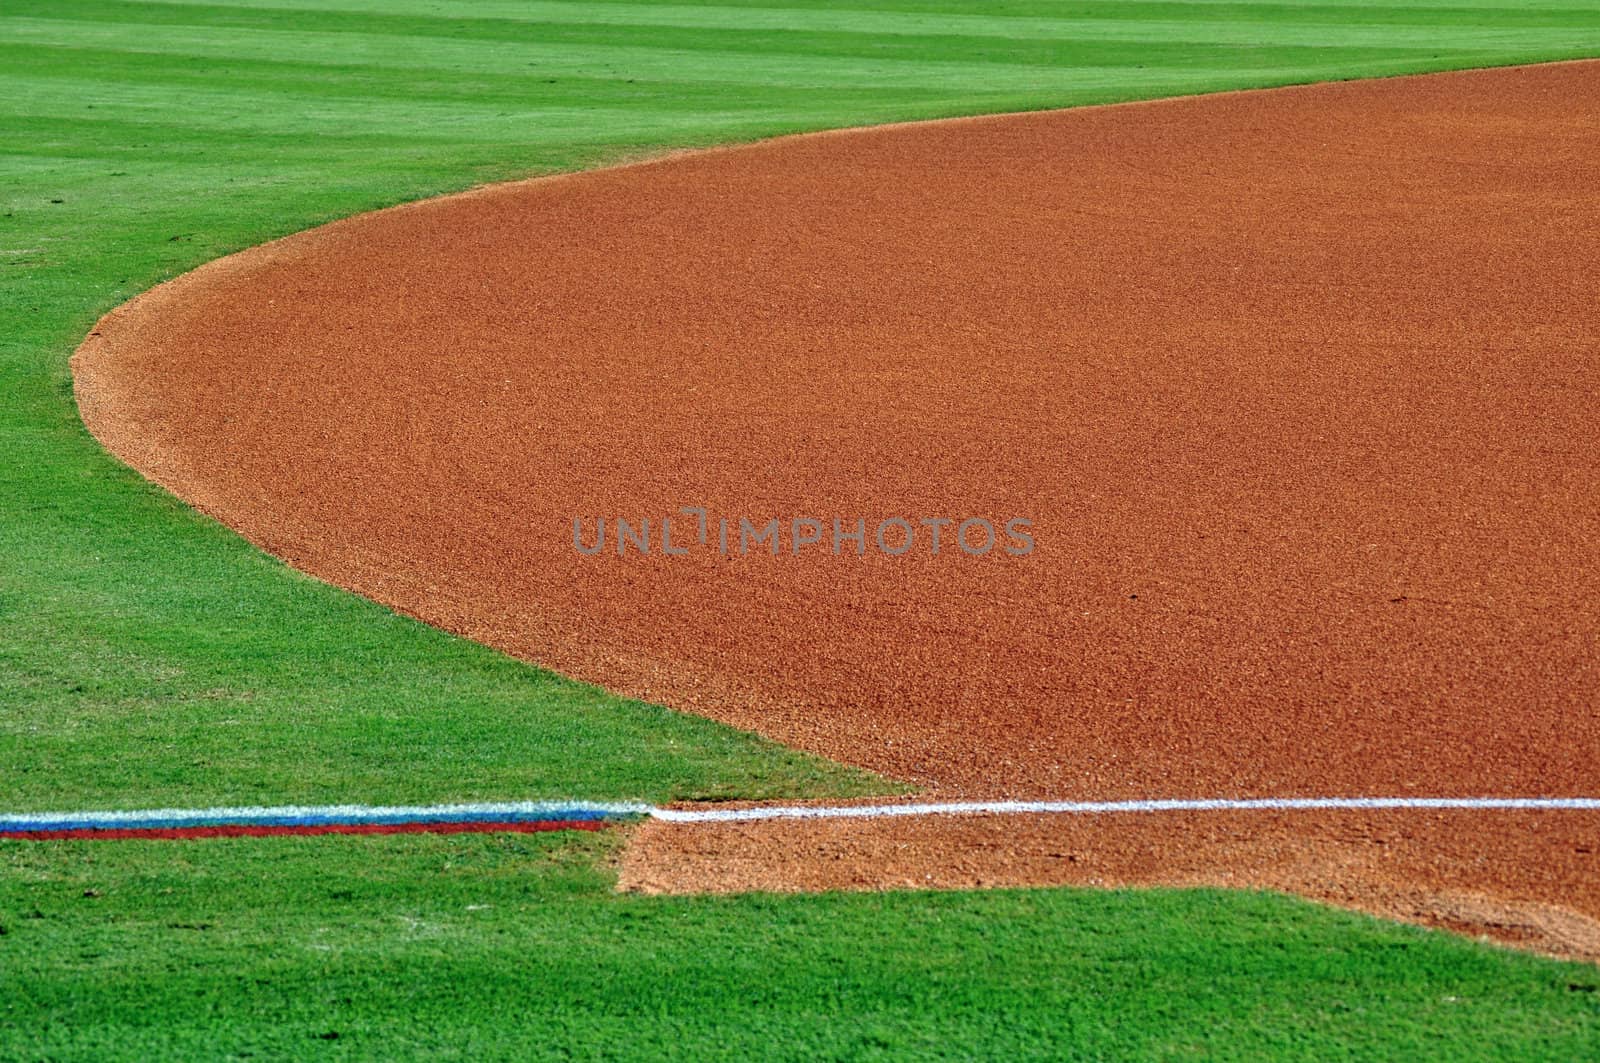 The field of minor league dreams-1 by RefocusPhoto